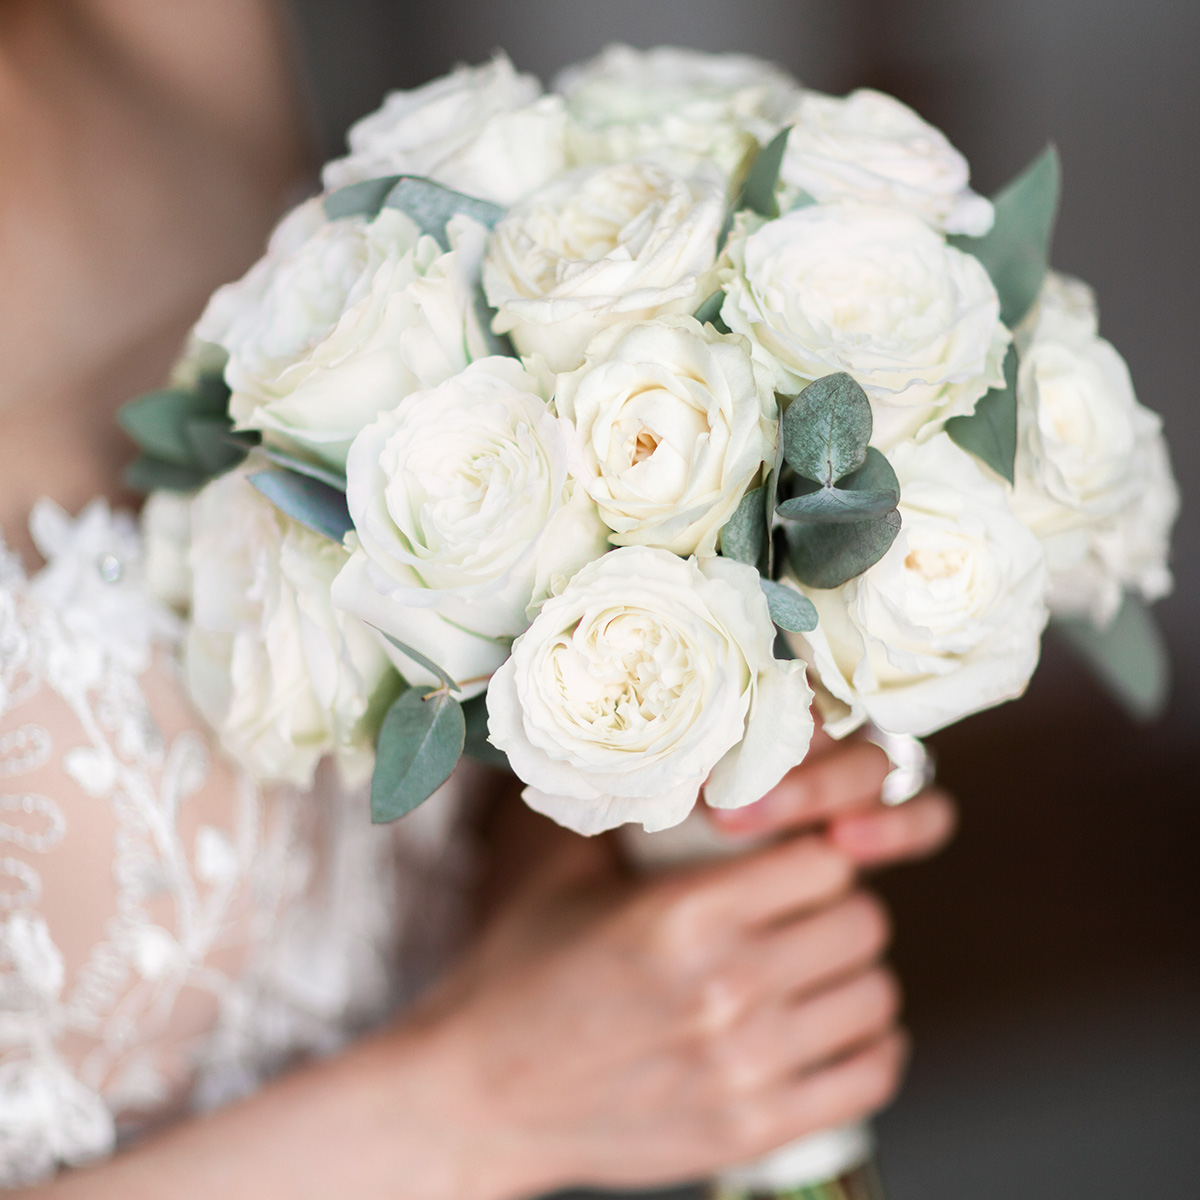 Traditional Wedding Flowers and Their Hidden Meanings - Wedding